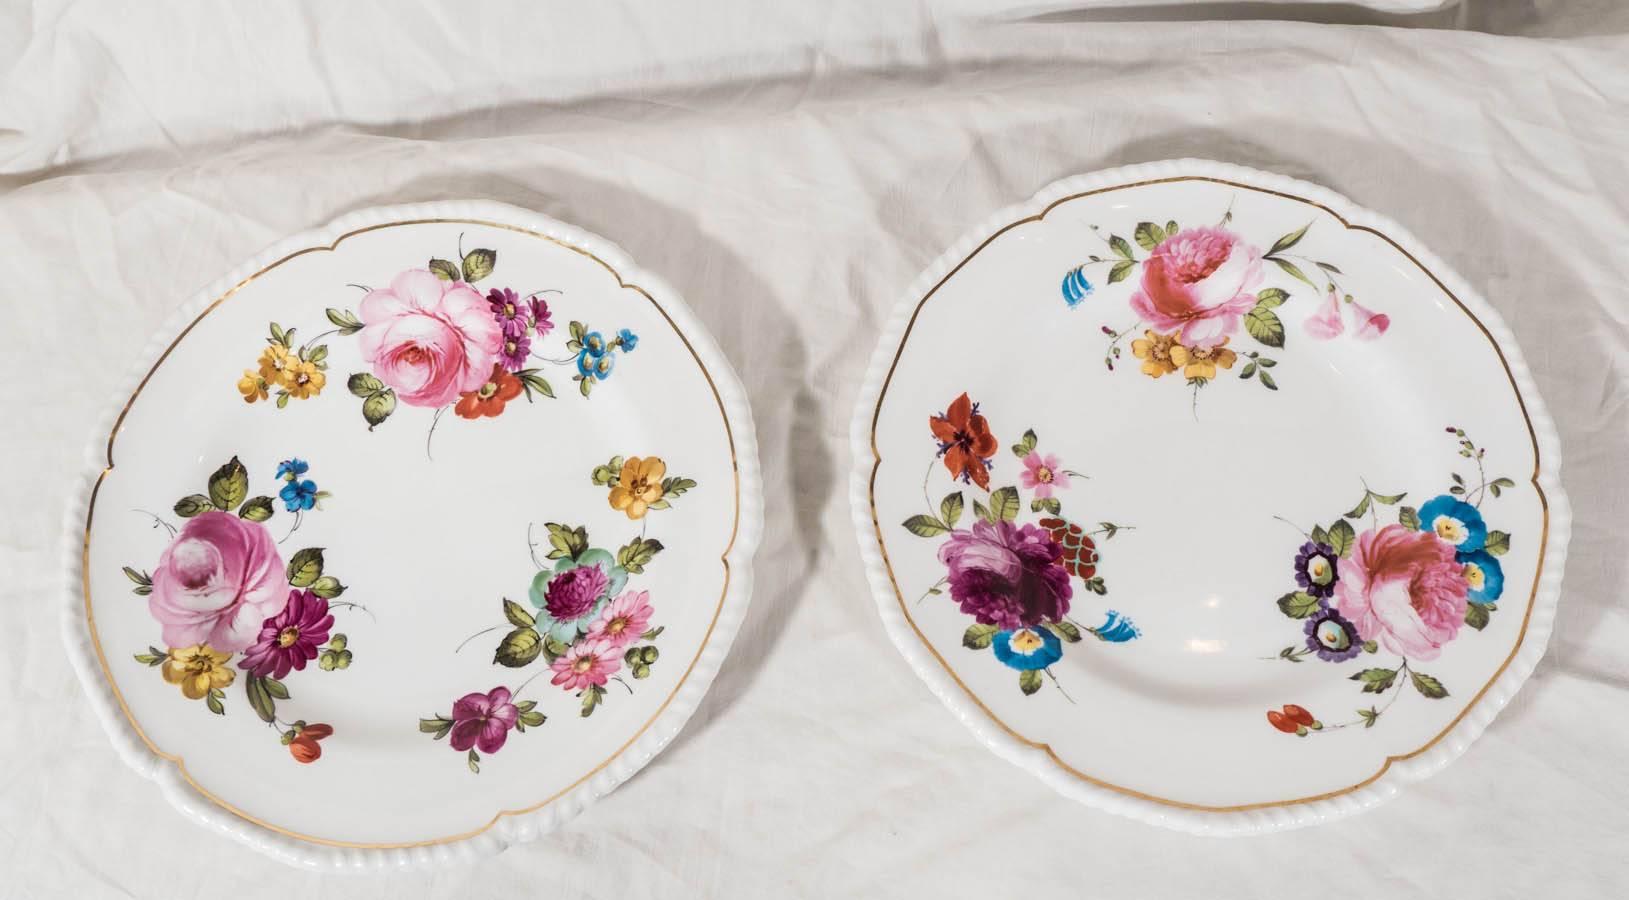 Antique Porcelain Dishes Each Hand-Painted with Roses on White Porcelain 1